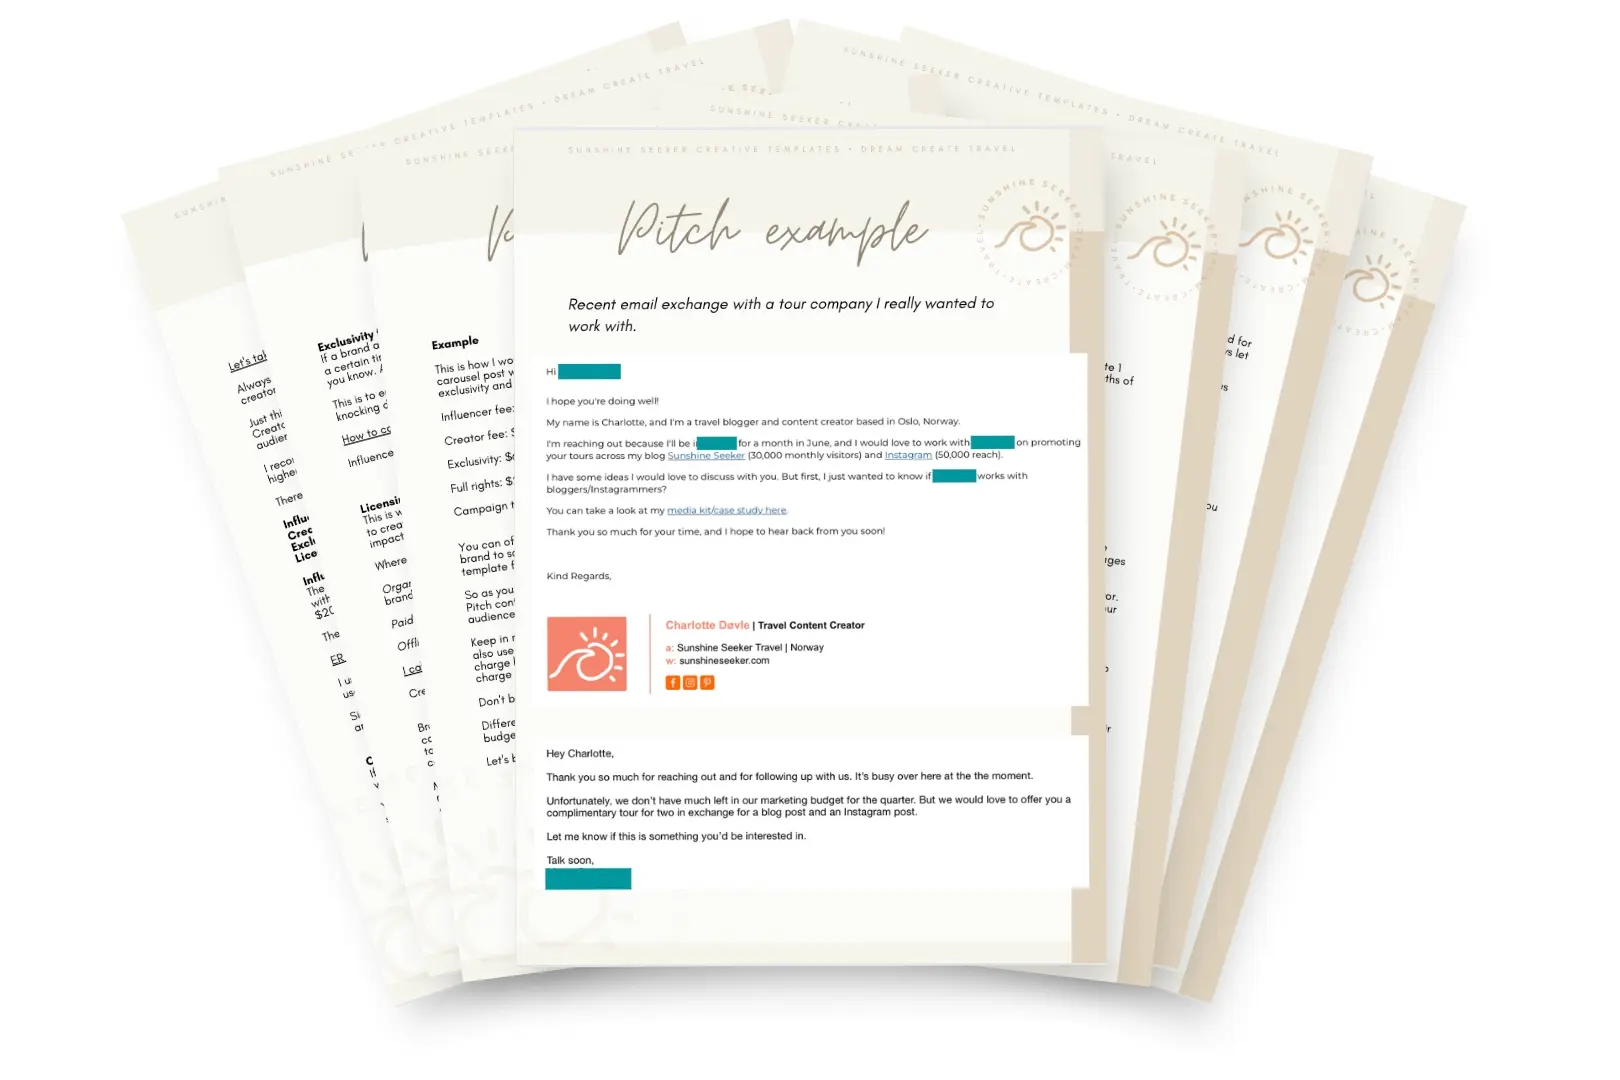 Mock up of the brand pitch examples and templates available in the Travel Creator Toolkit